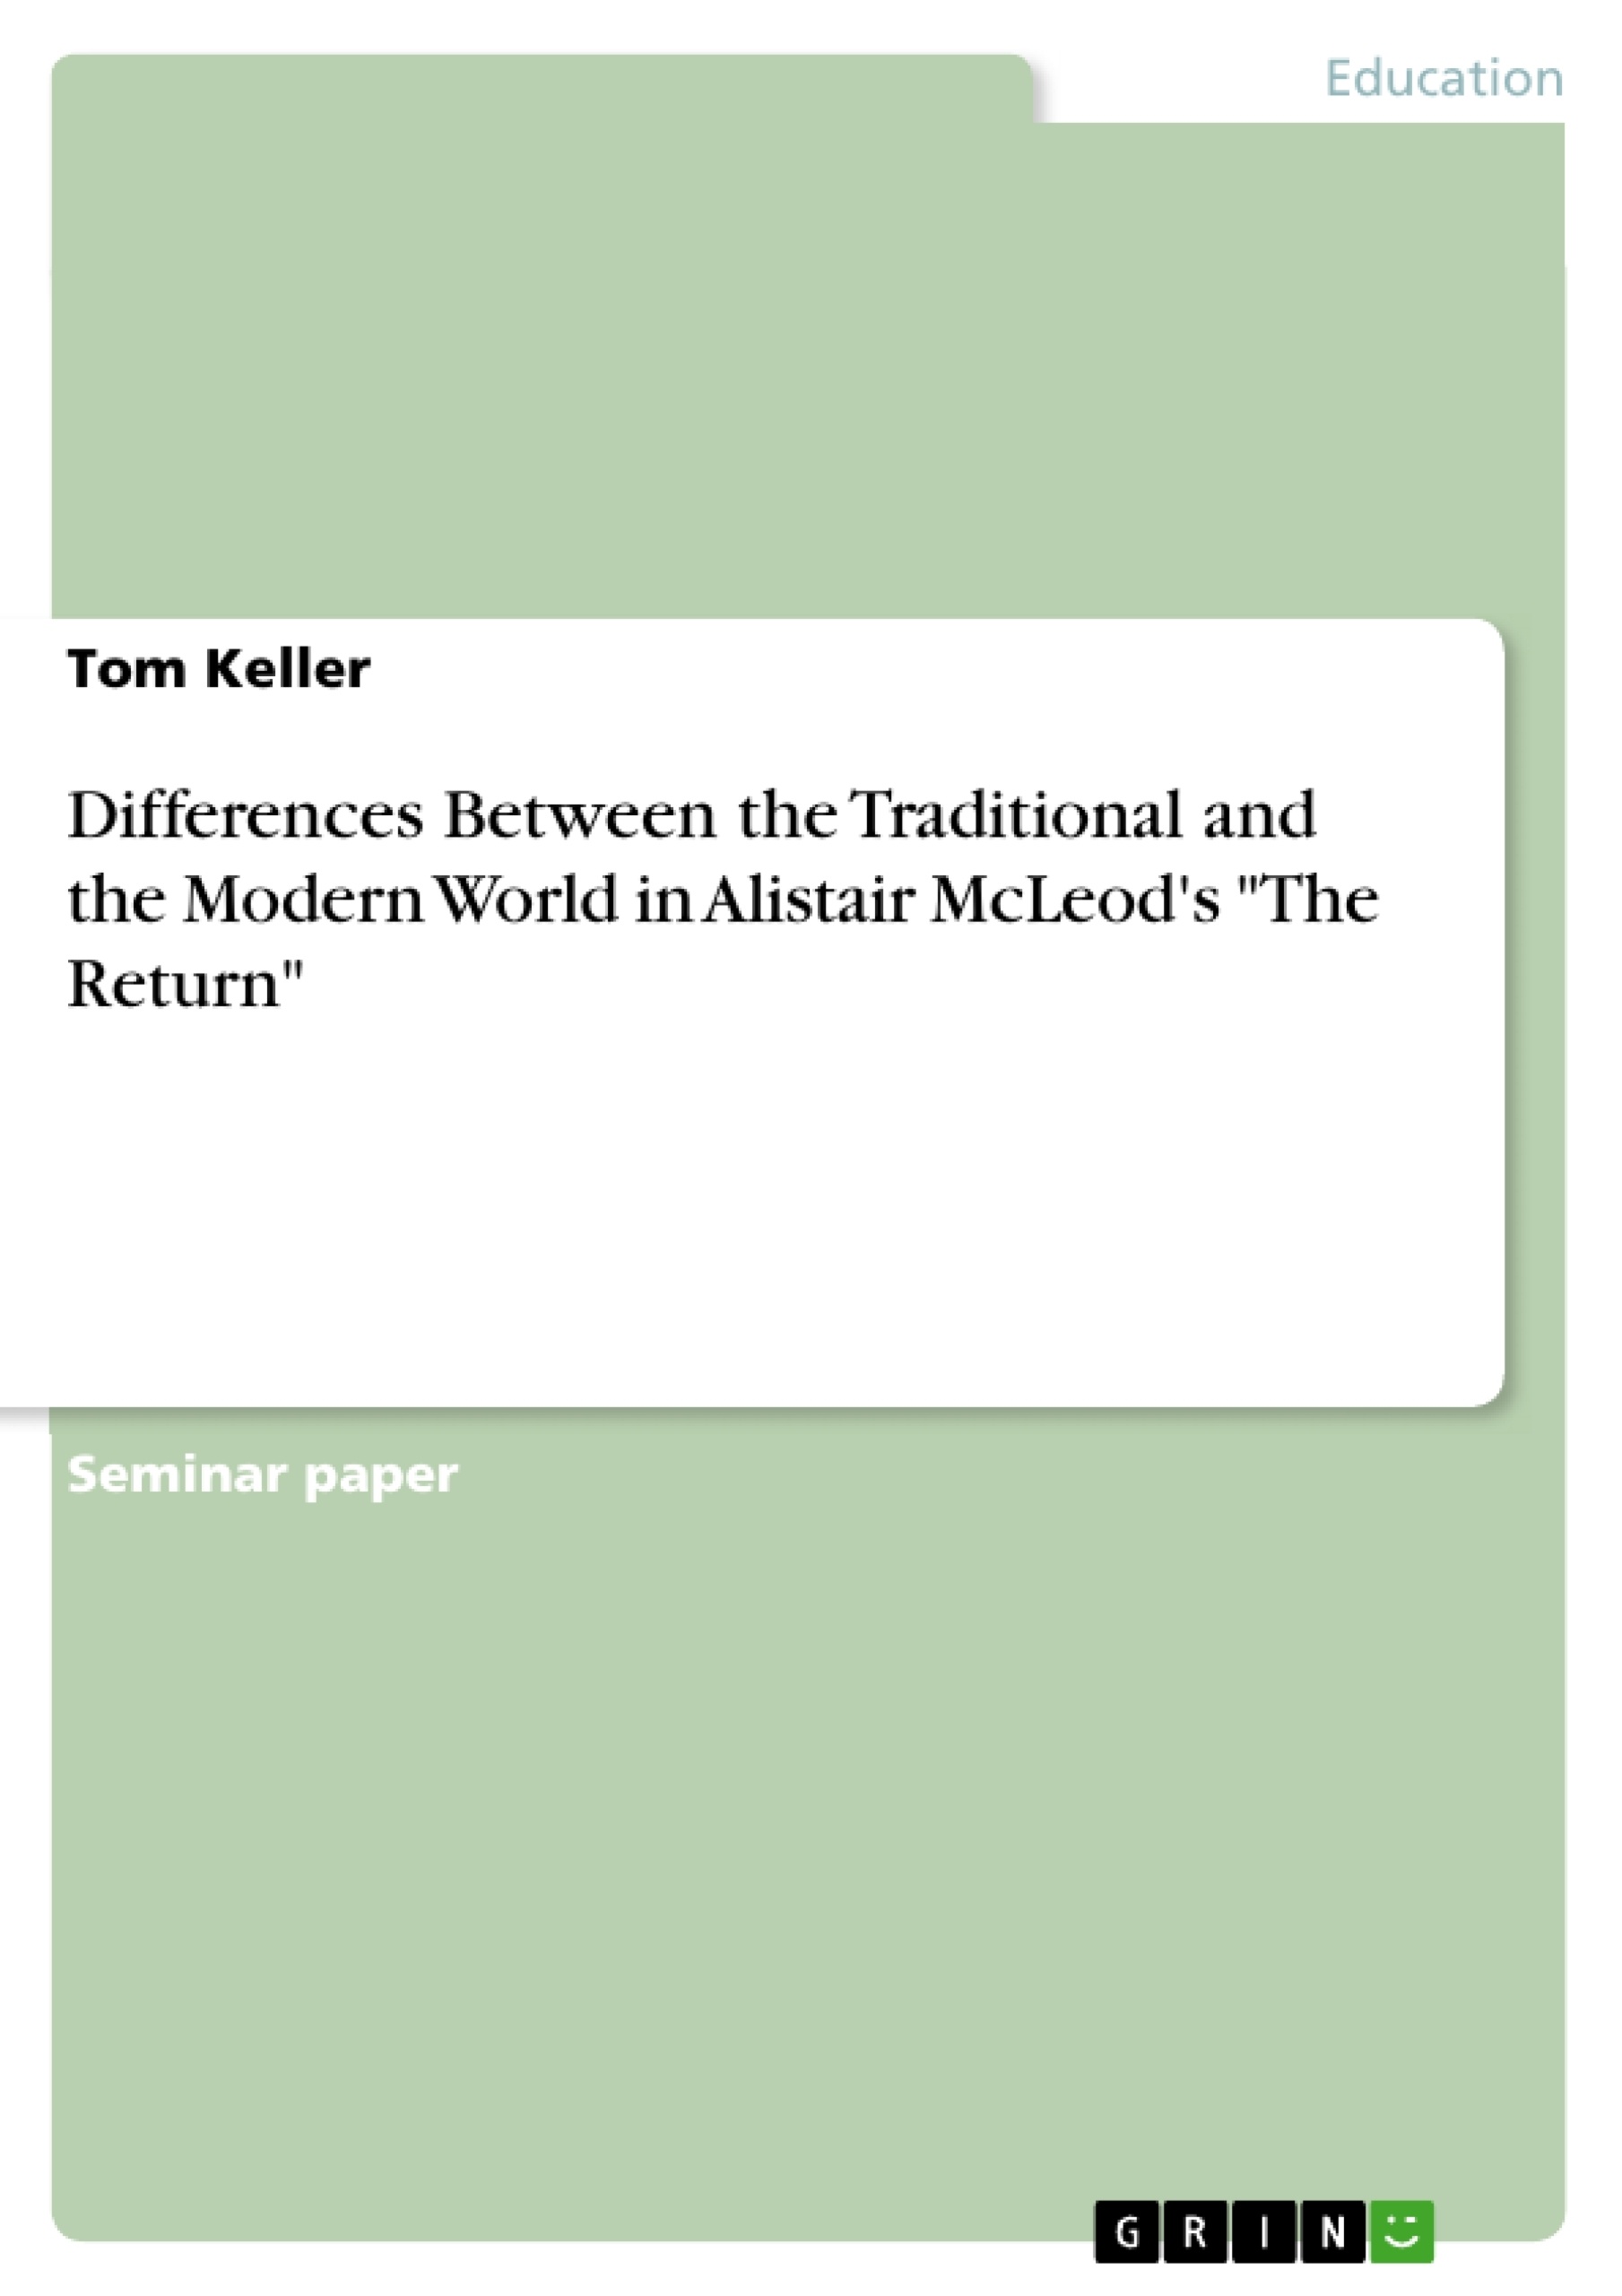 Title: Differences Between the Traditional and the Modern World in Alistair McLeod's "The Return"